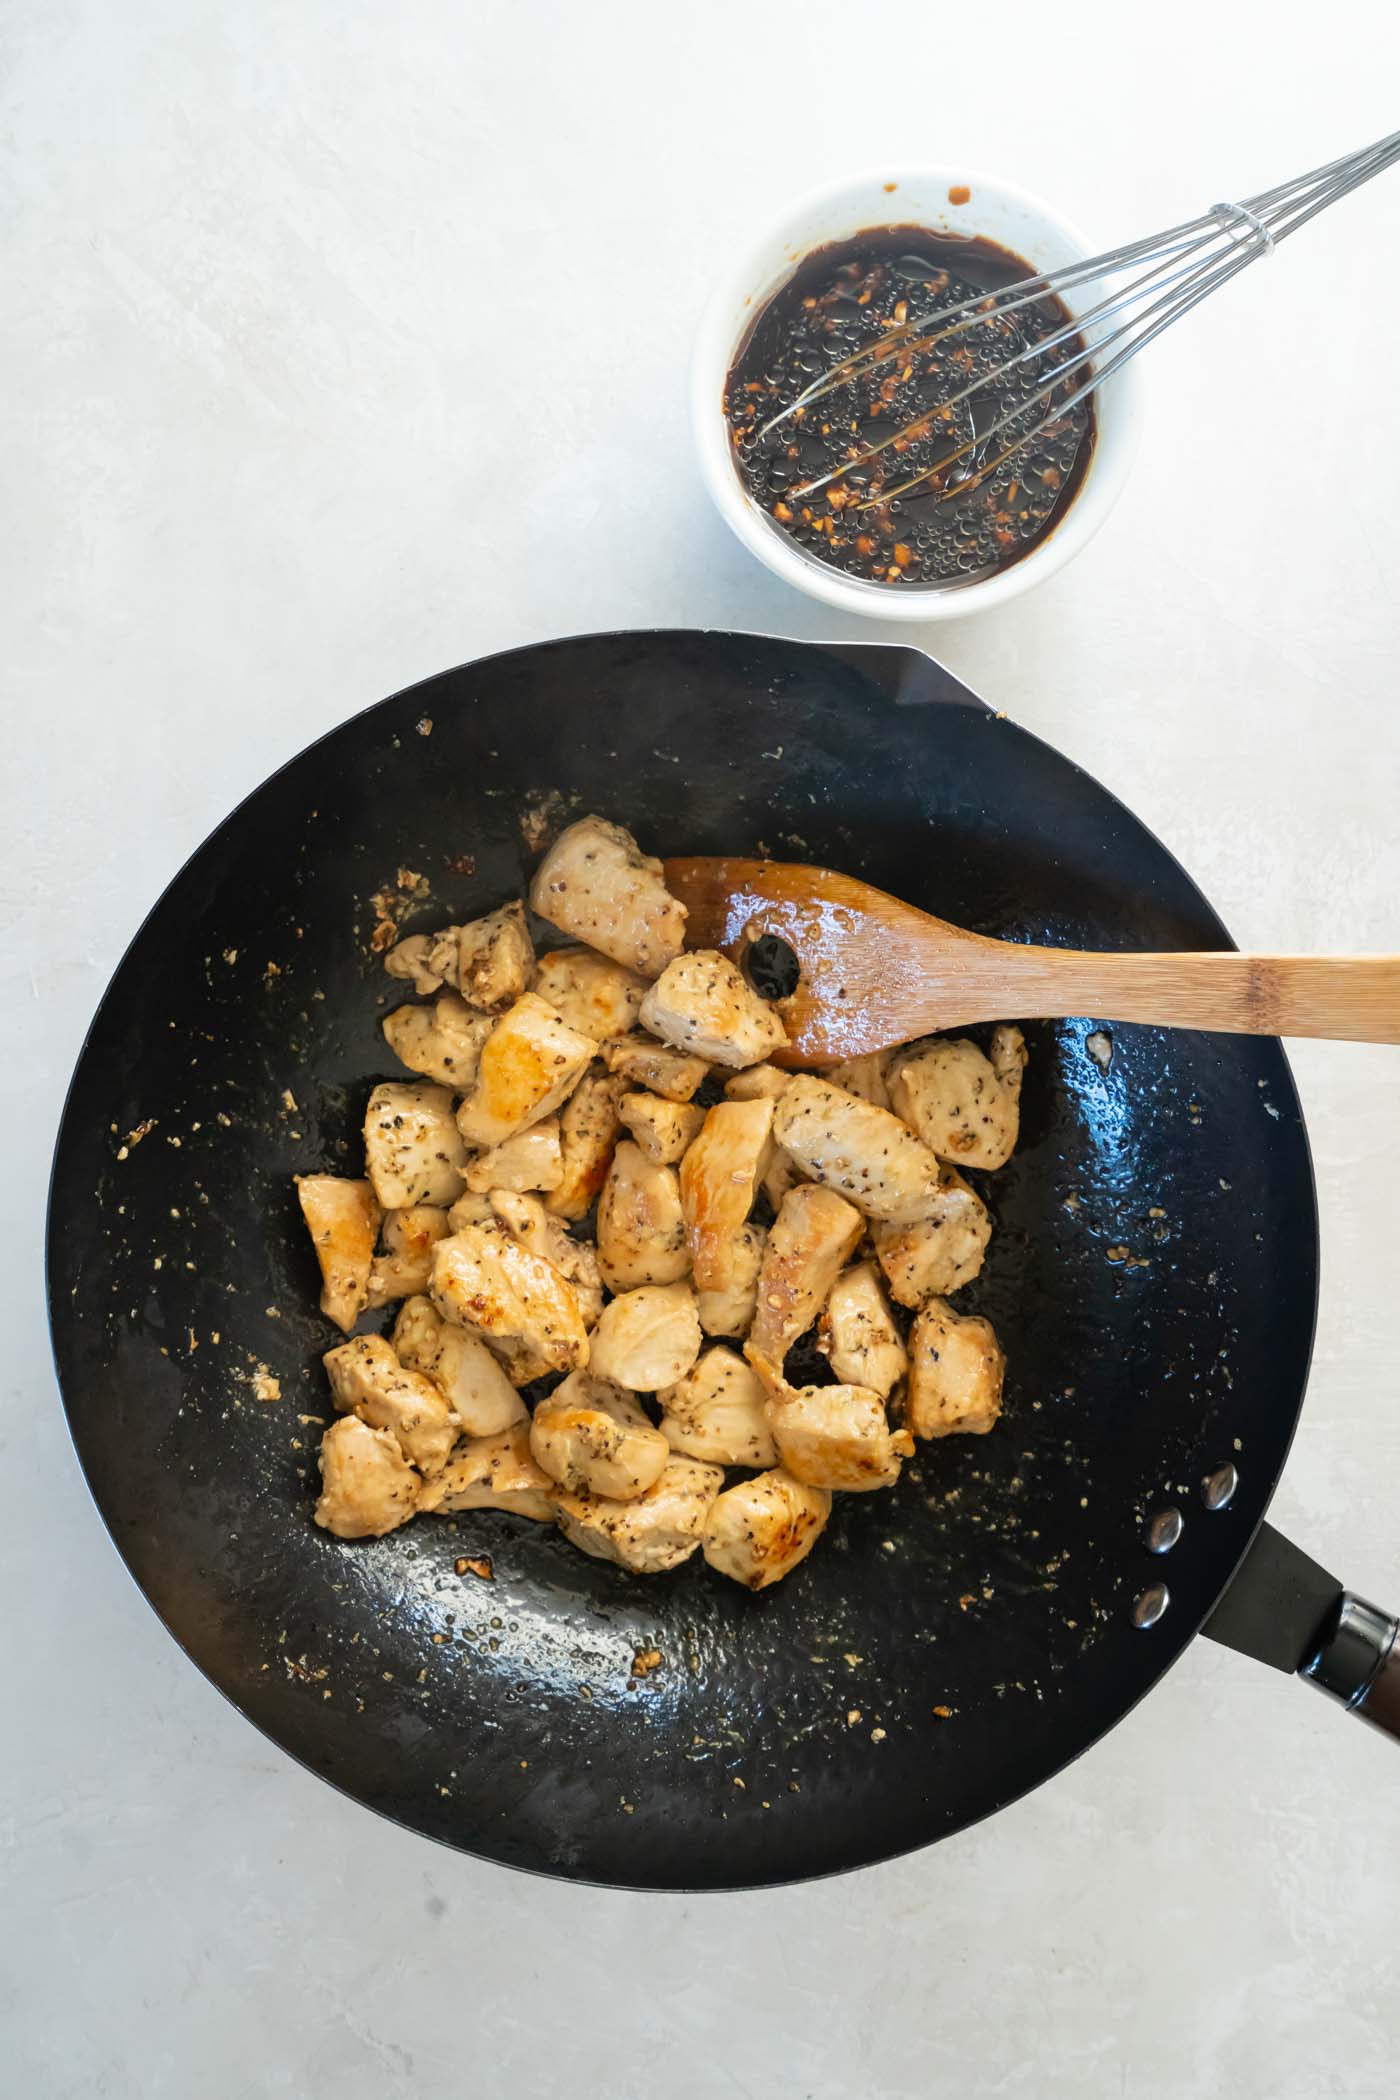 Browned chicken pieces in a skillet with a wooden spoon.